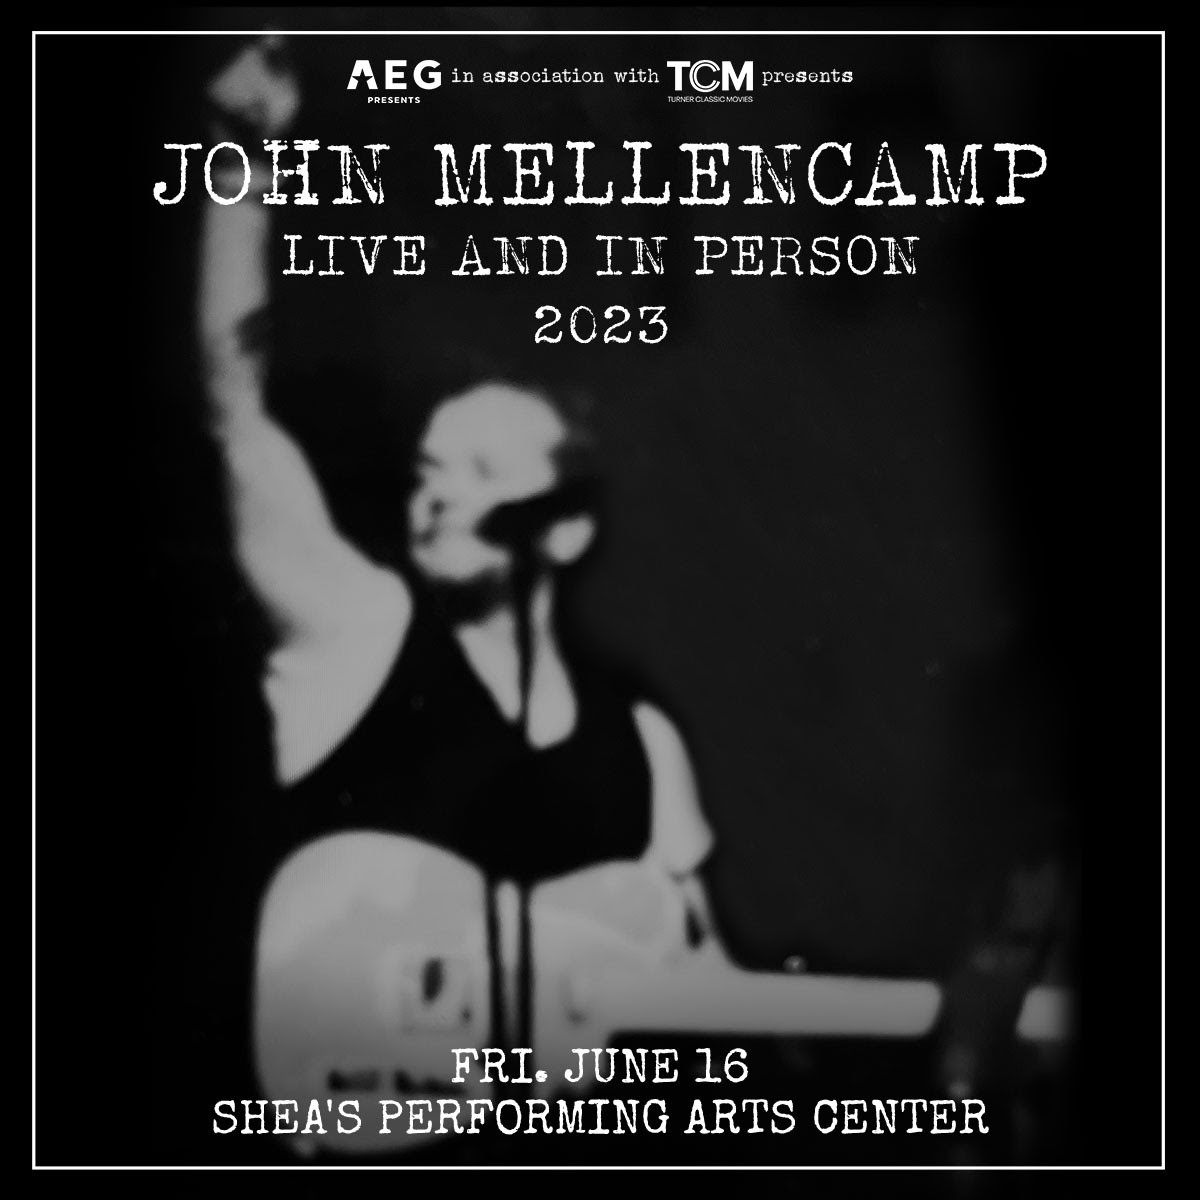 John Mellencamp, `Live and In Person 2023` (Promotional image courtesy of Shea's Performing Arts Center)